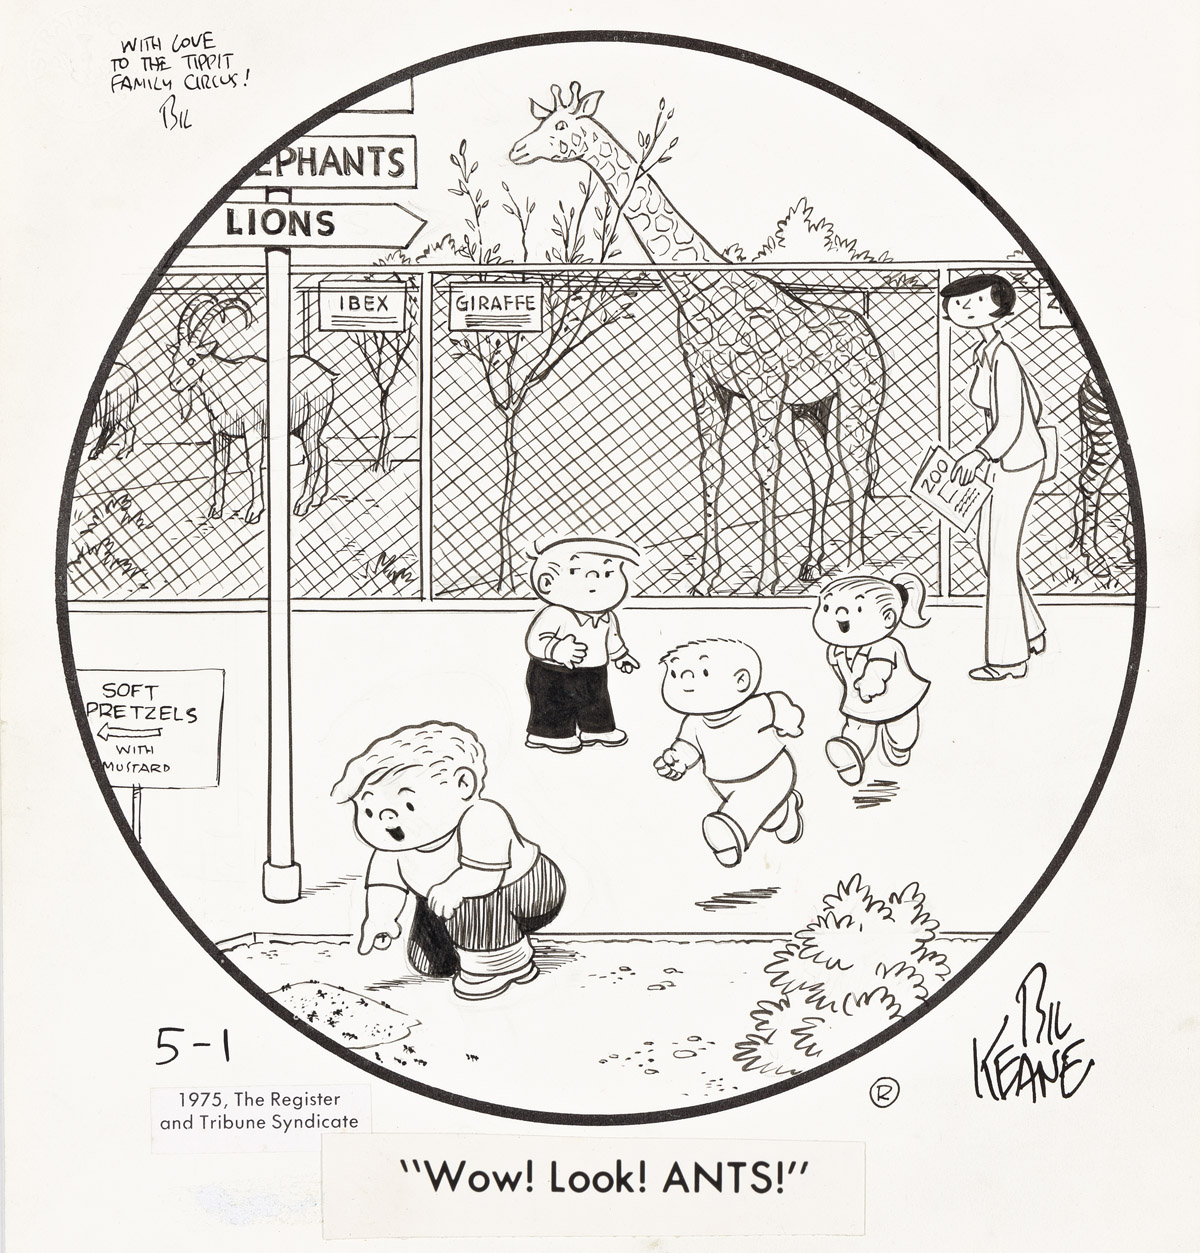 BIL KEANE (1922-2011) Daddy just yawned and were all passin it around * Wow! Look! Ants! [COMICS / FAMILY CIRCUS]